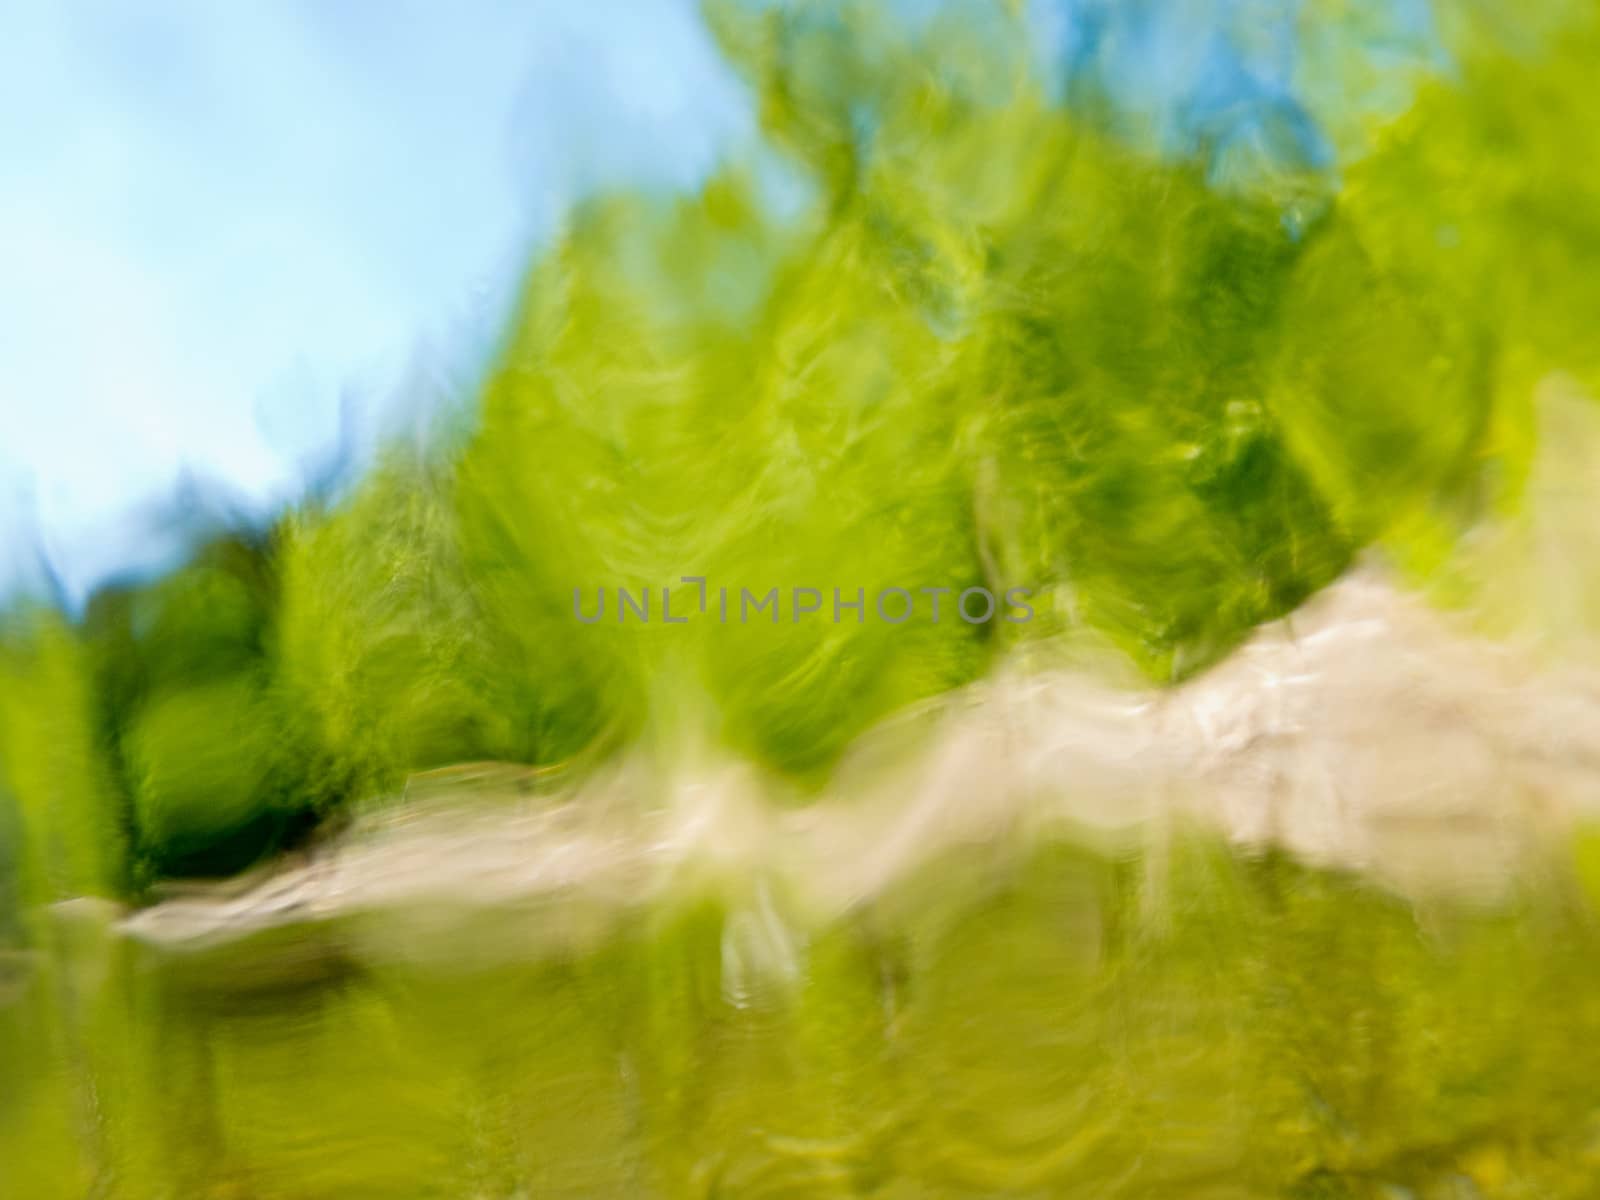 Blurry nature background wavy distorted blue green by PiLens